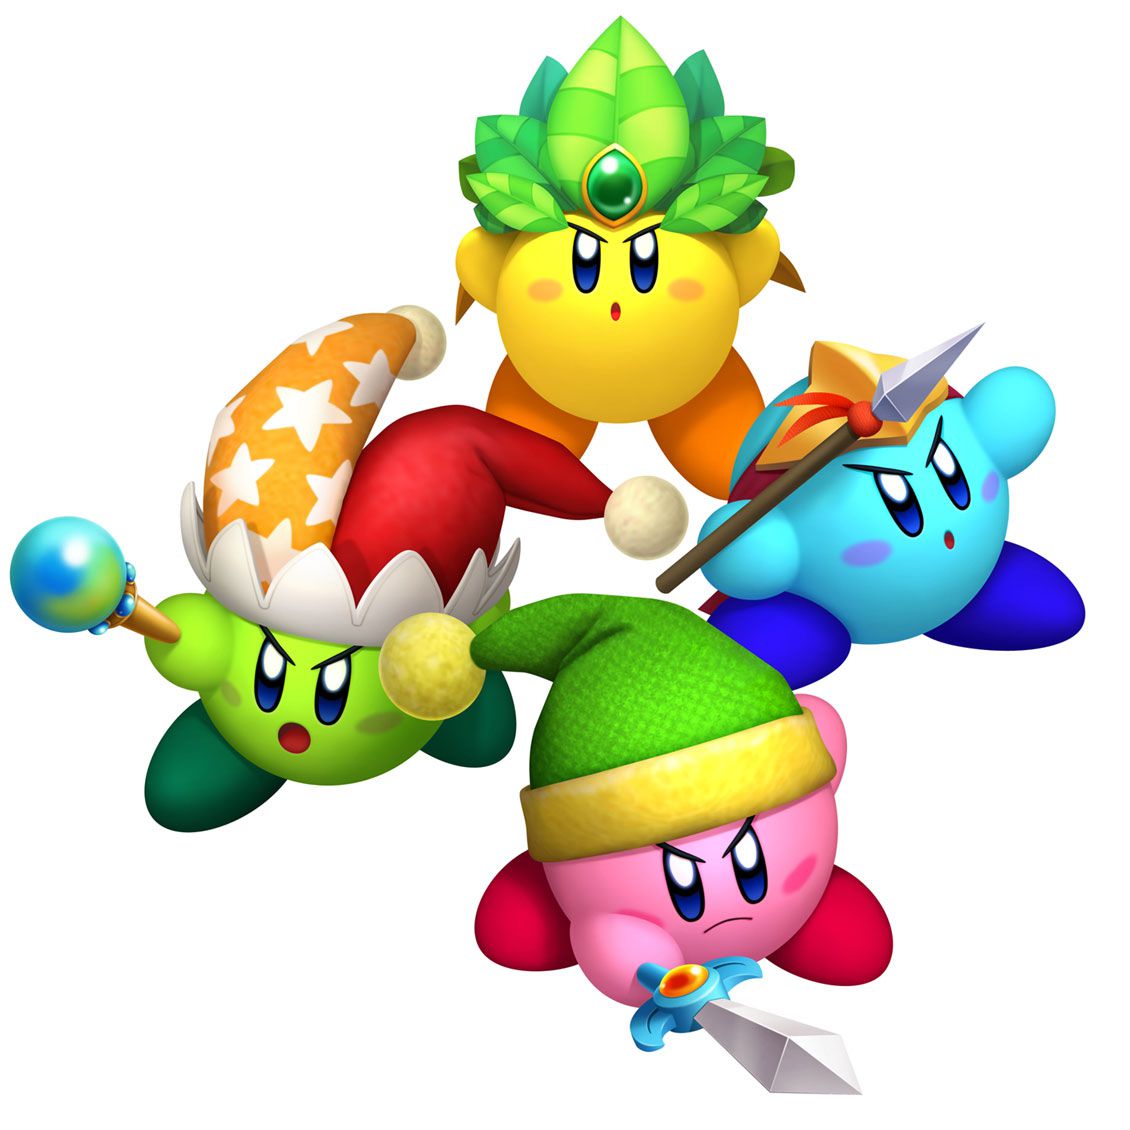 Kirby wii-star images 21